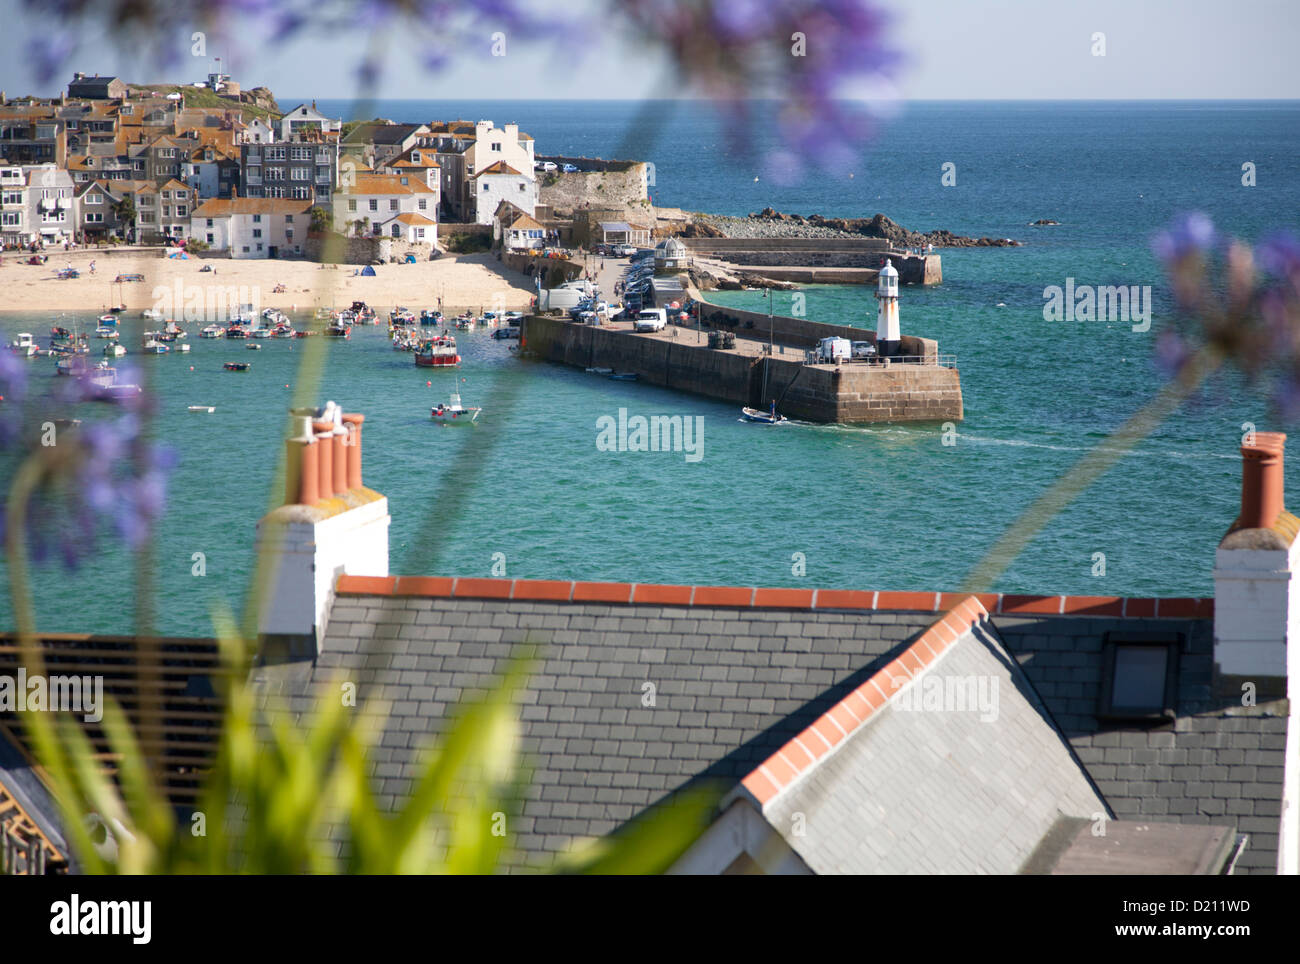 St Ives harbour Cornwall UK viewed through flowers Stock Photo